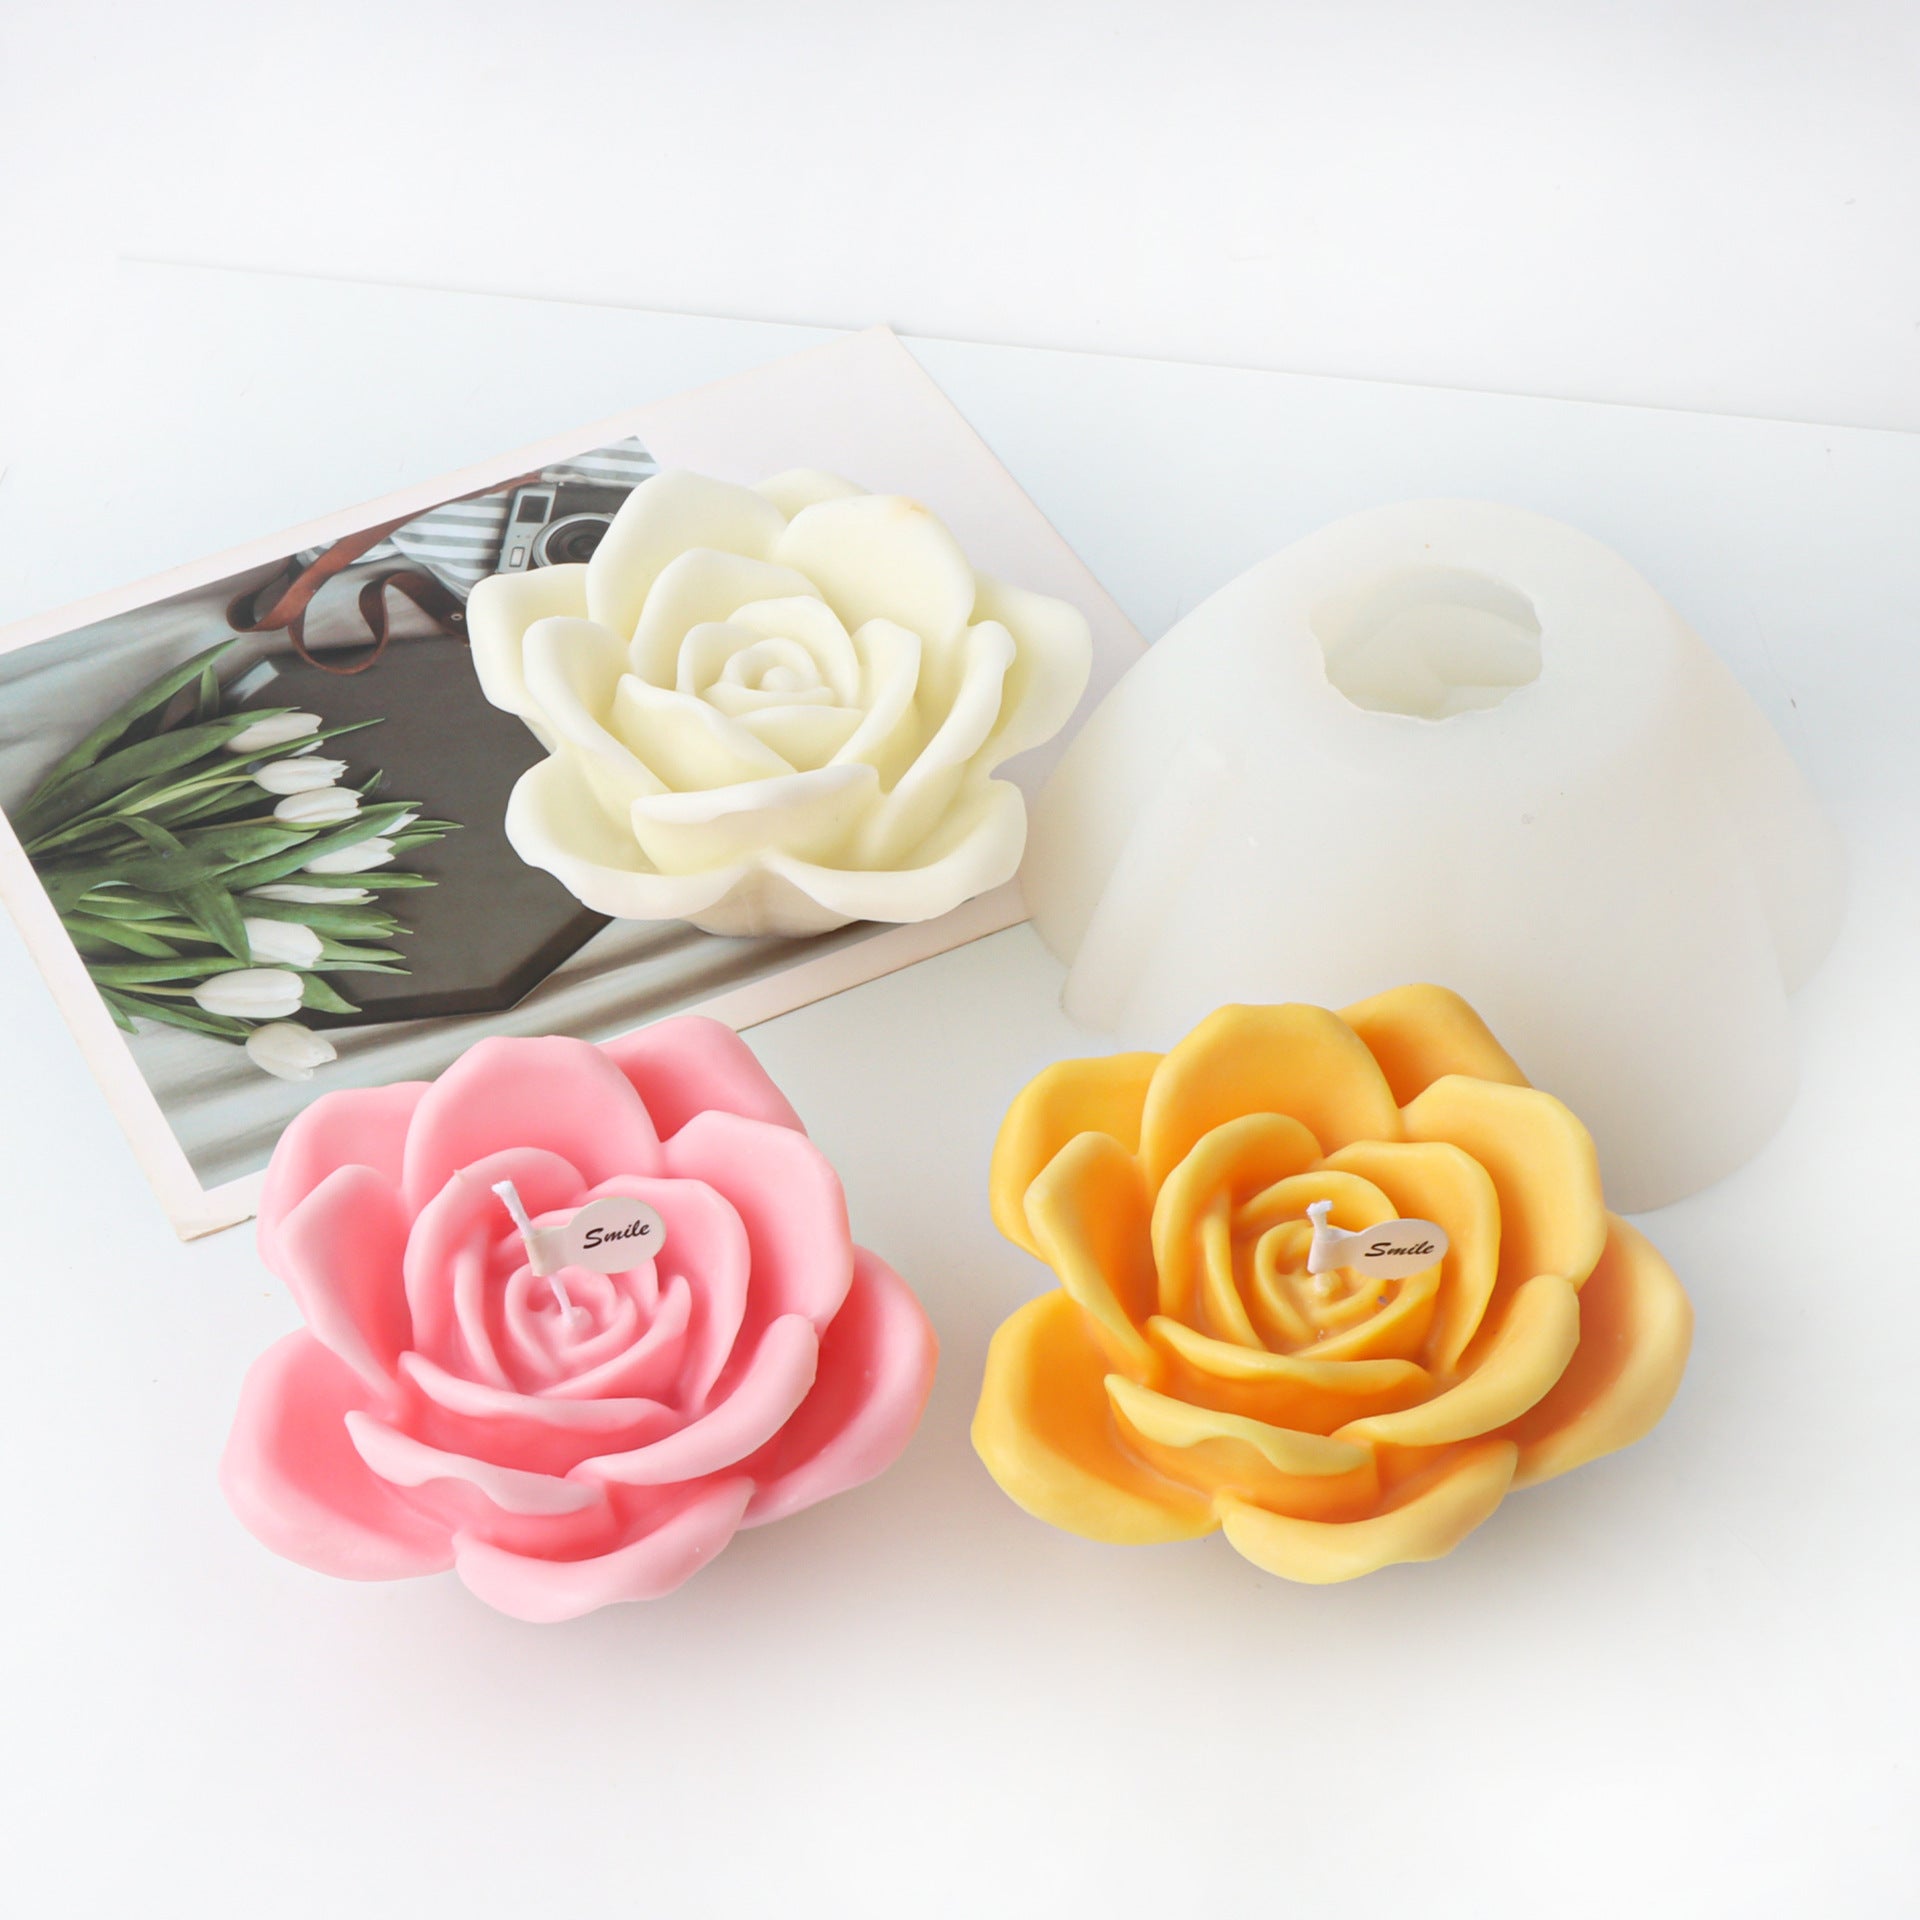 Blooming Peony Flower Candle Mold Aromatherapy Candle Plaster Decoration Silicone Mold, Silicone candle molds, Geometric candle molds, DIY candle making molds, Aromatherapy Candle, Sented candle, candles, 